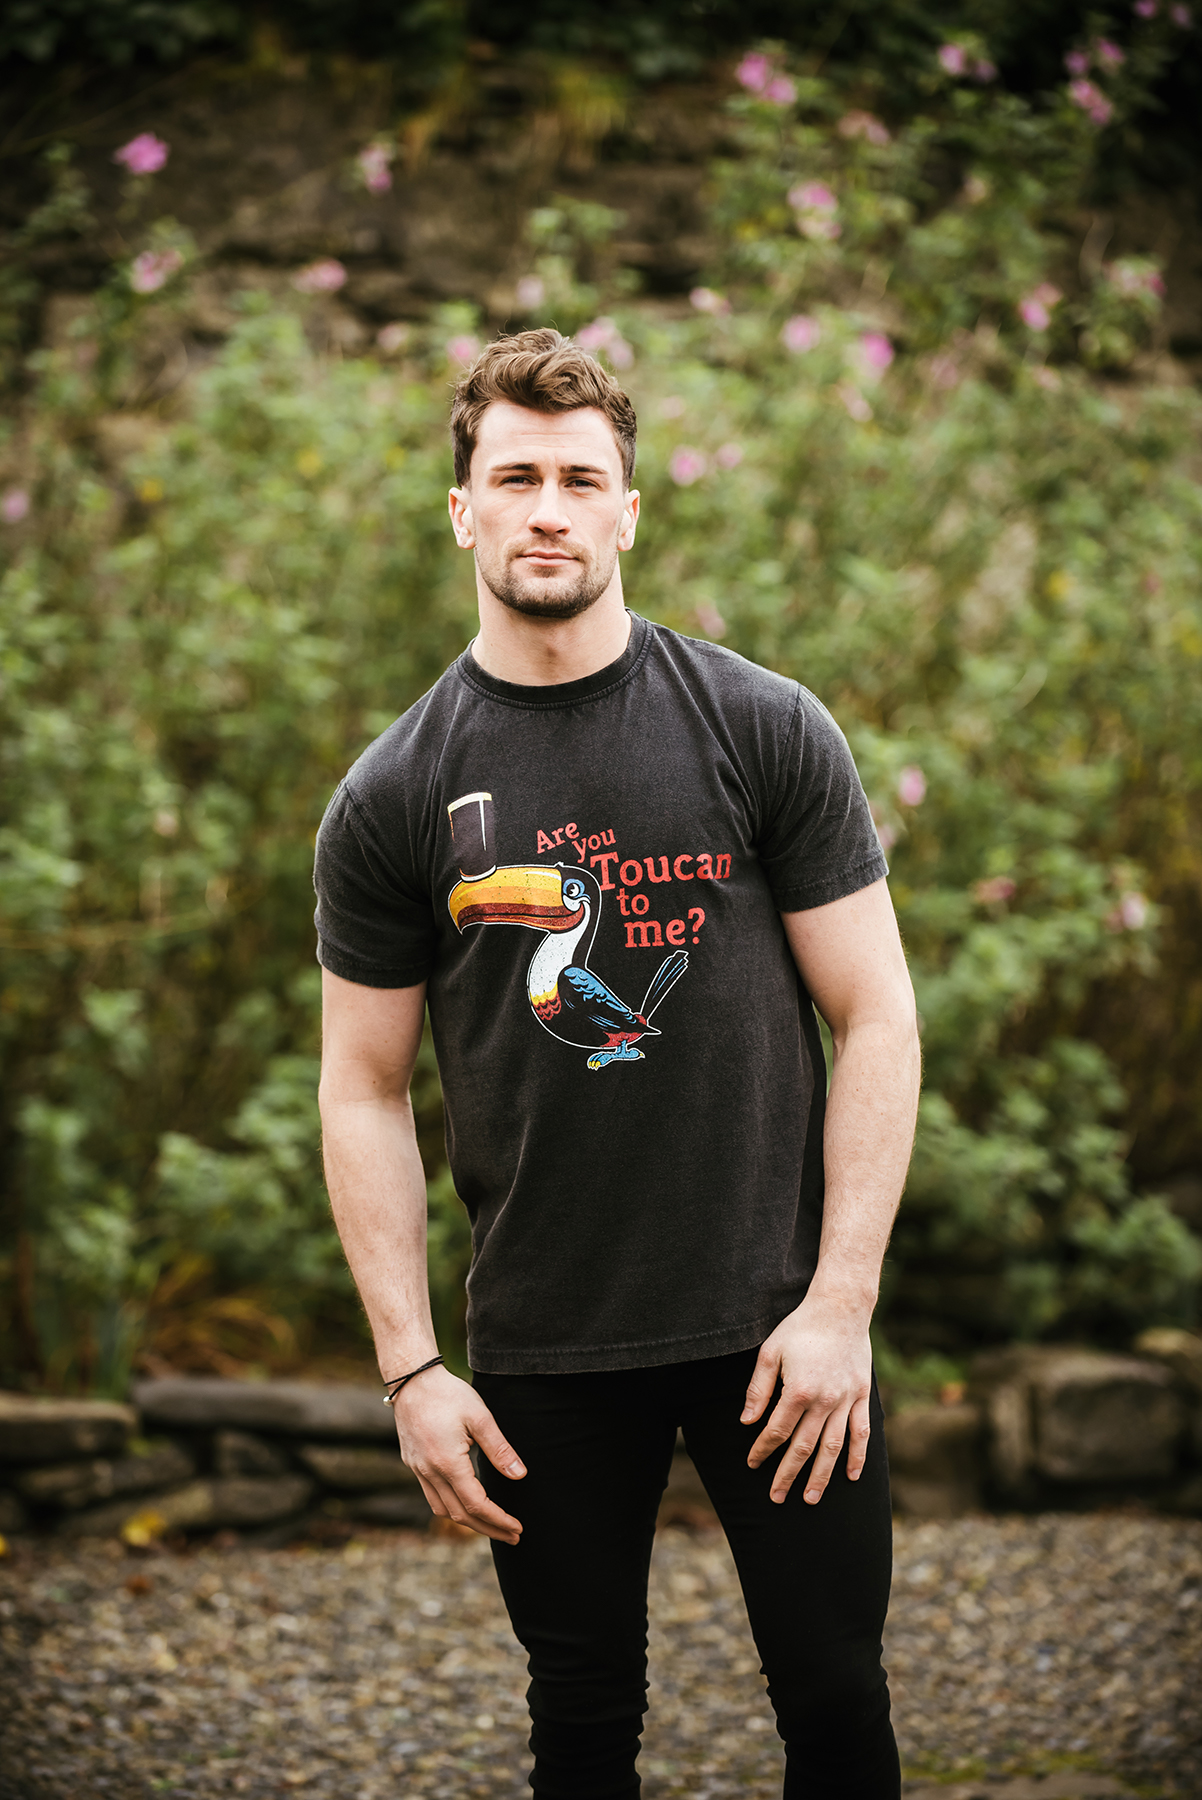 Product image for Irish T-shirts | Guinness Are You Toucan To Me Black T-shirt